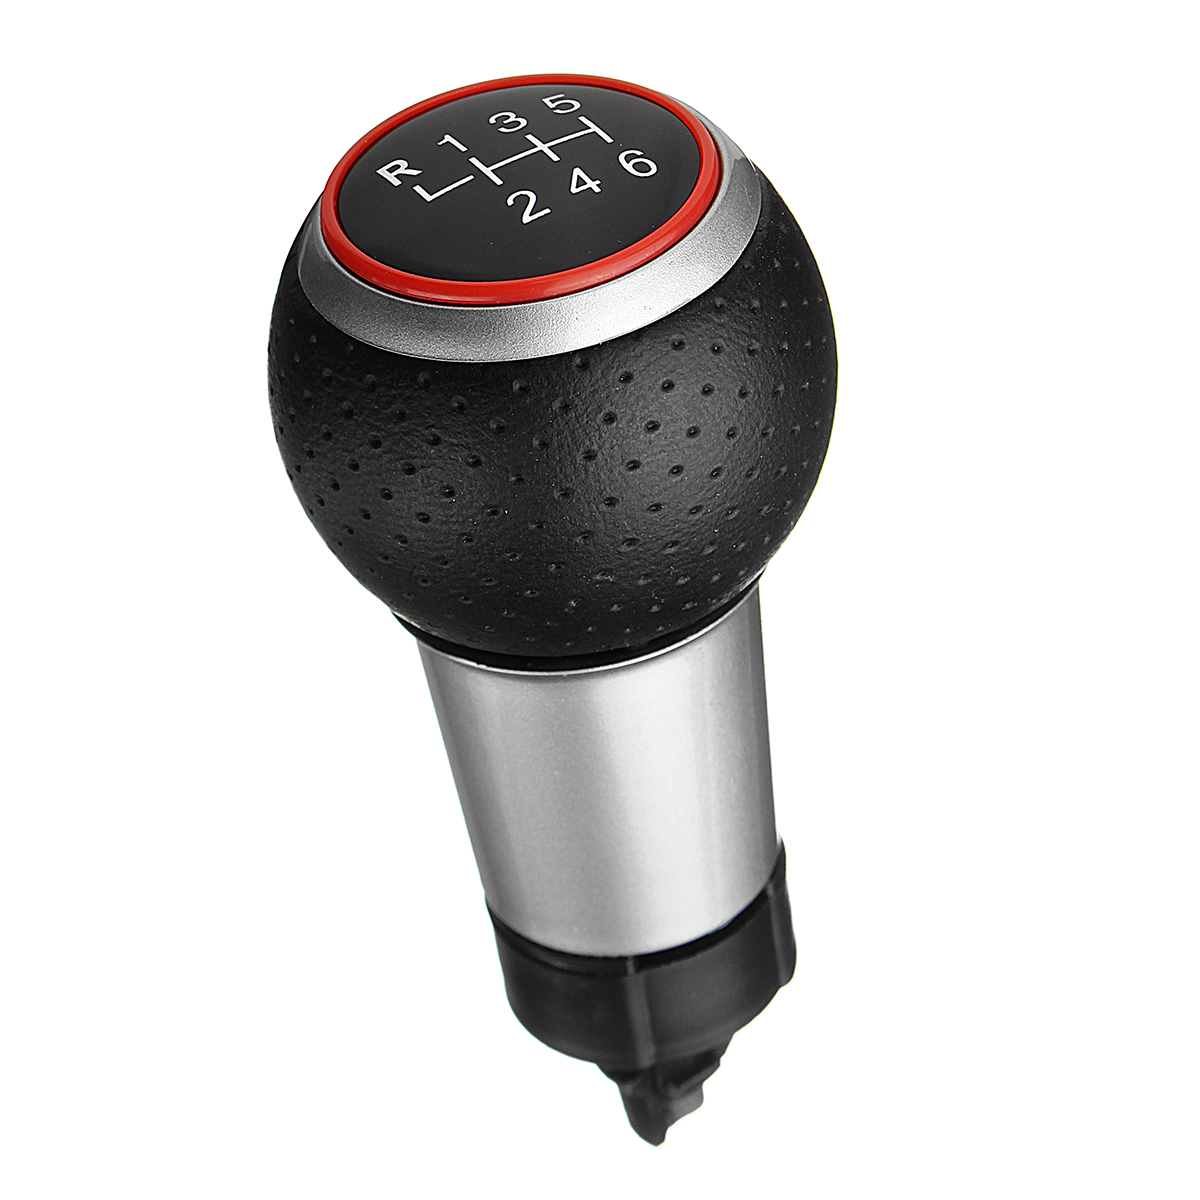 

6 Speed Gear Shift Knob PU Leather For Audi A4 S4 B8 8K S-Line 2007-2015